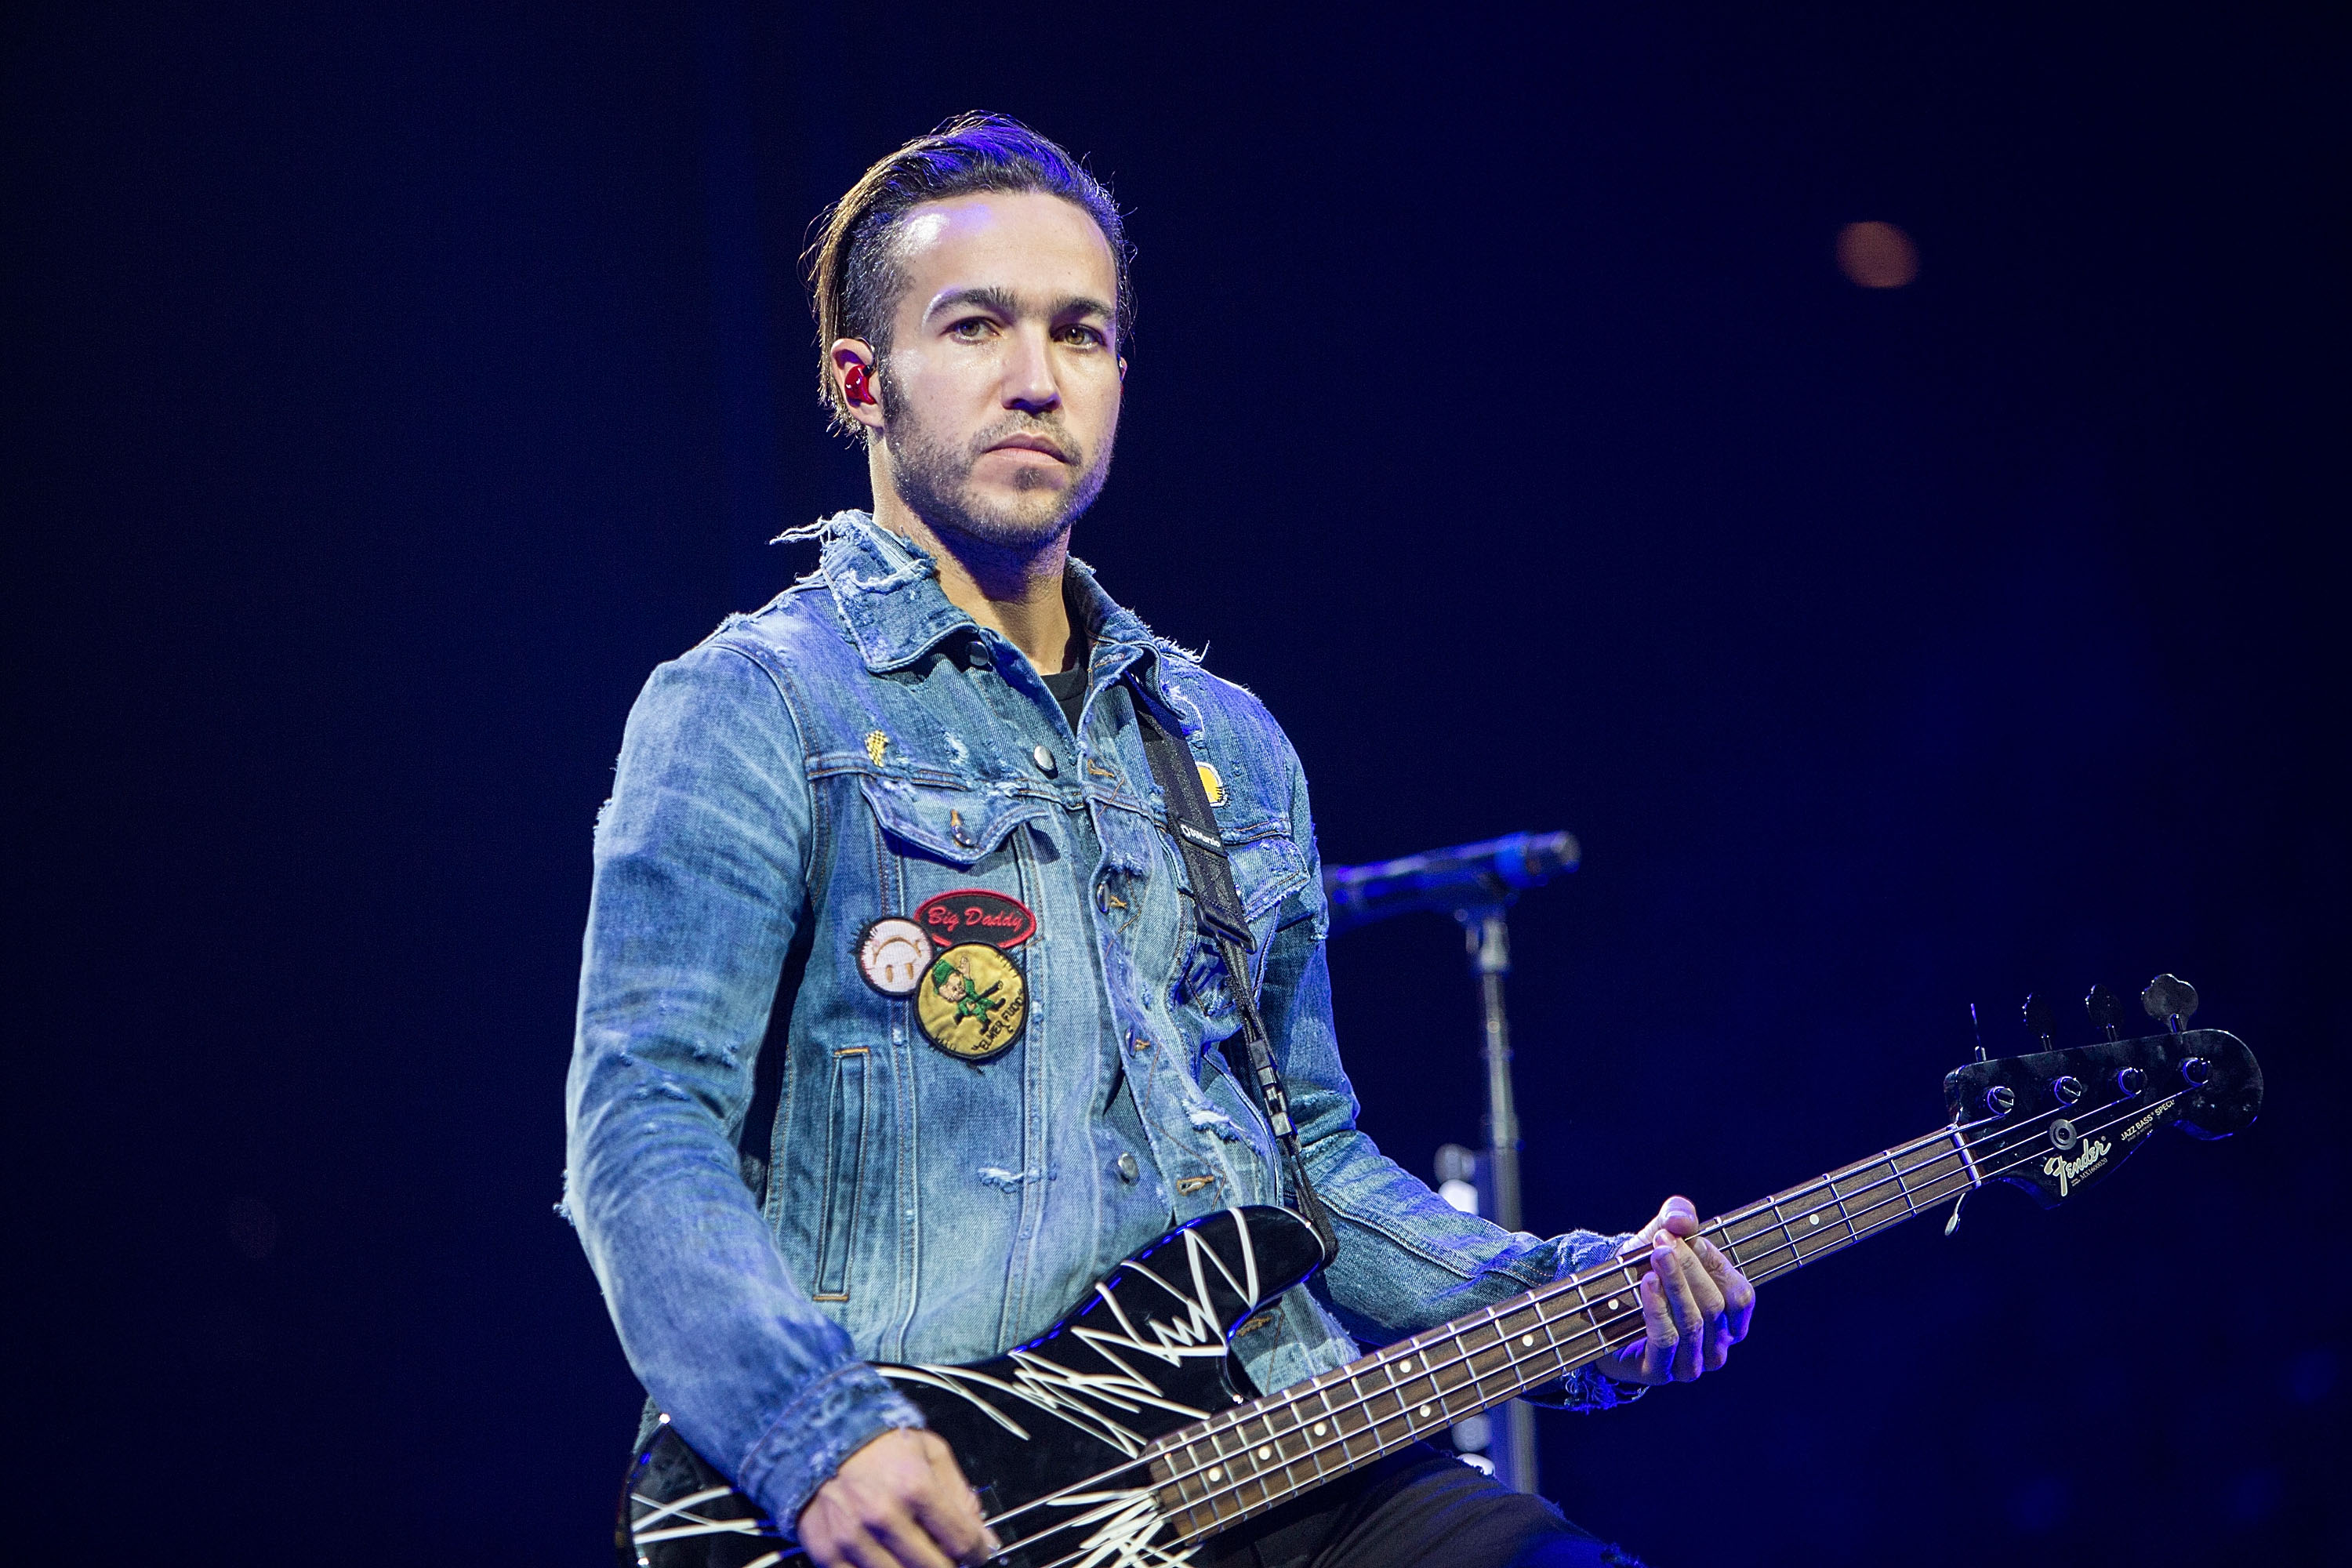 Pete Wentz of Fall Out Boy holding a guitar